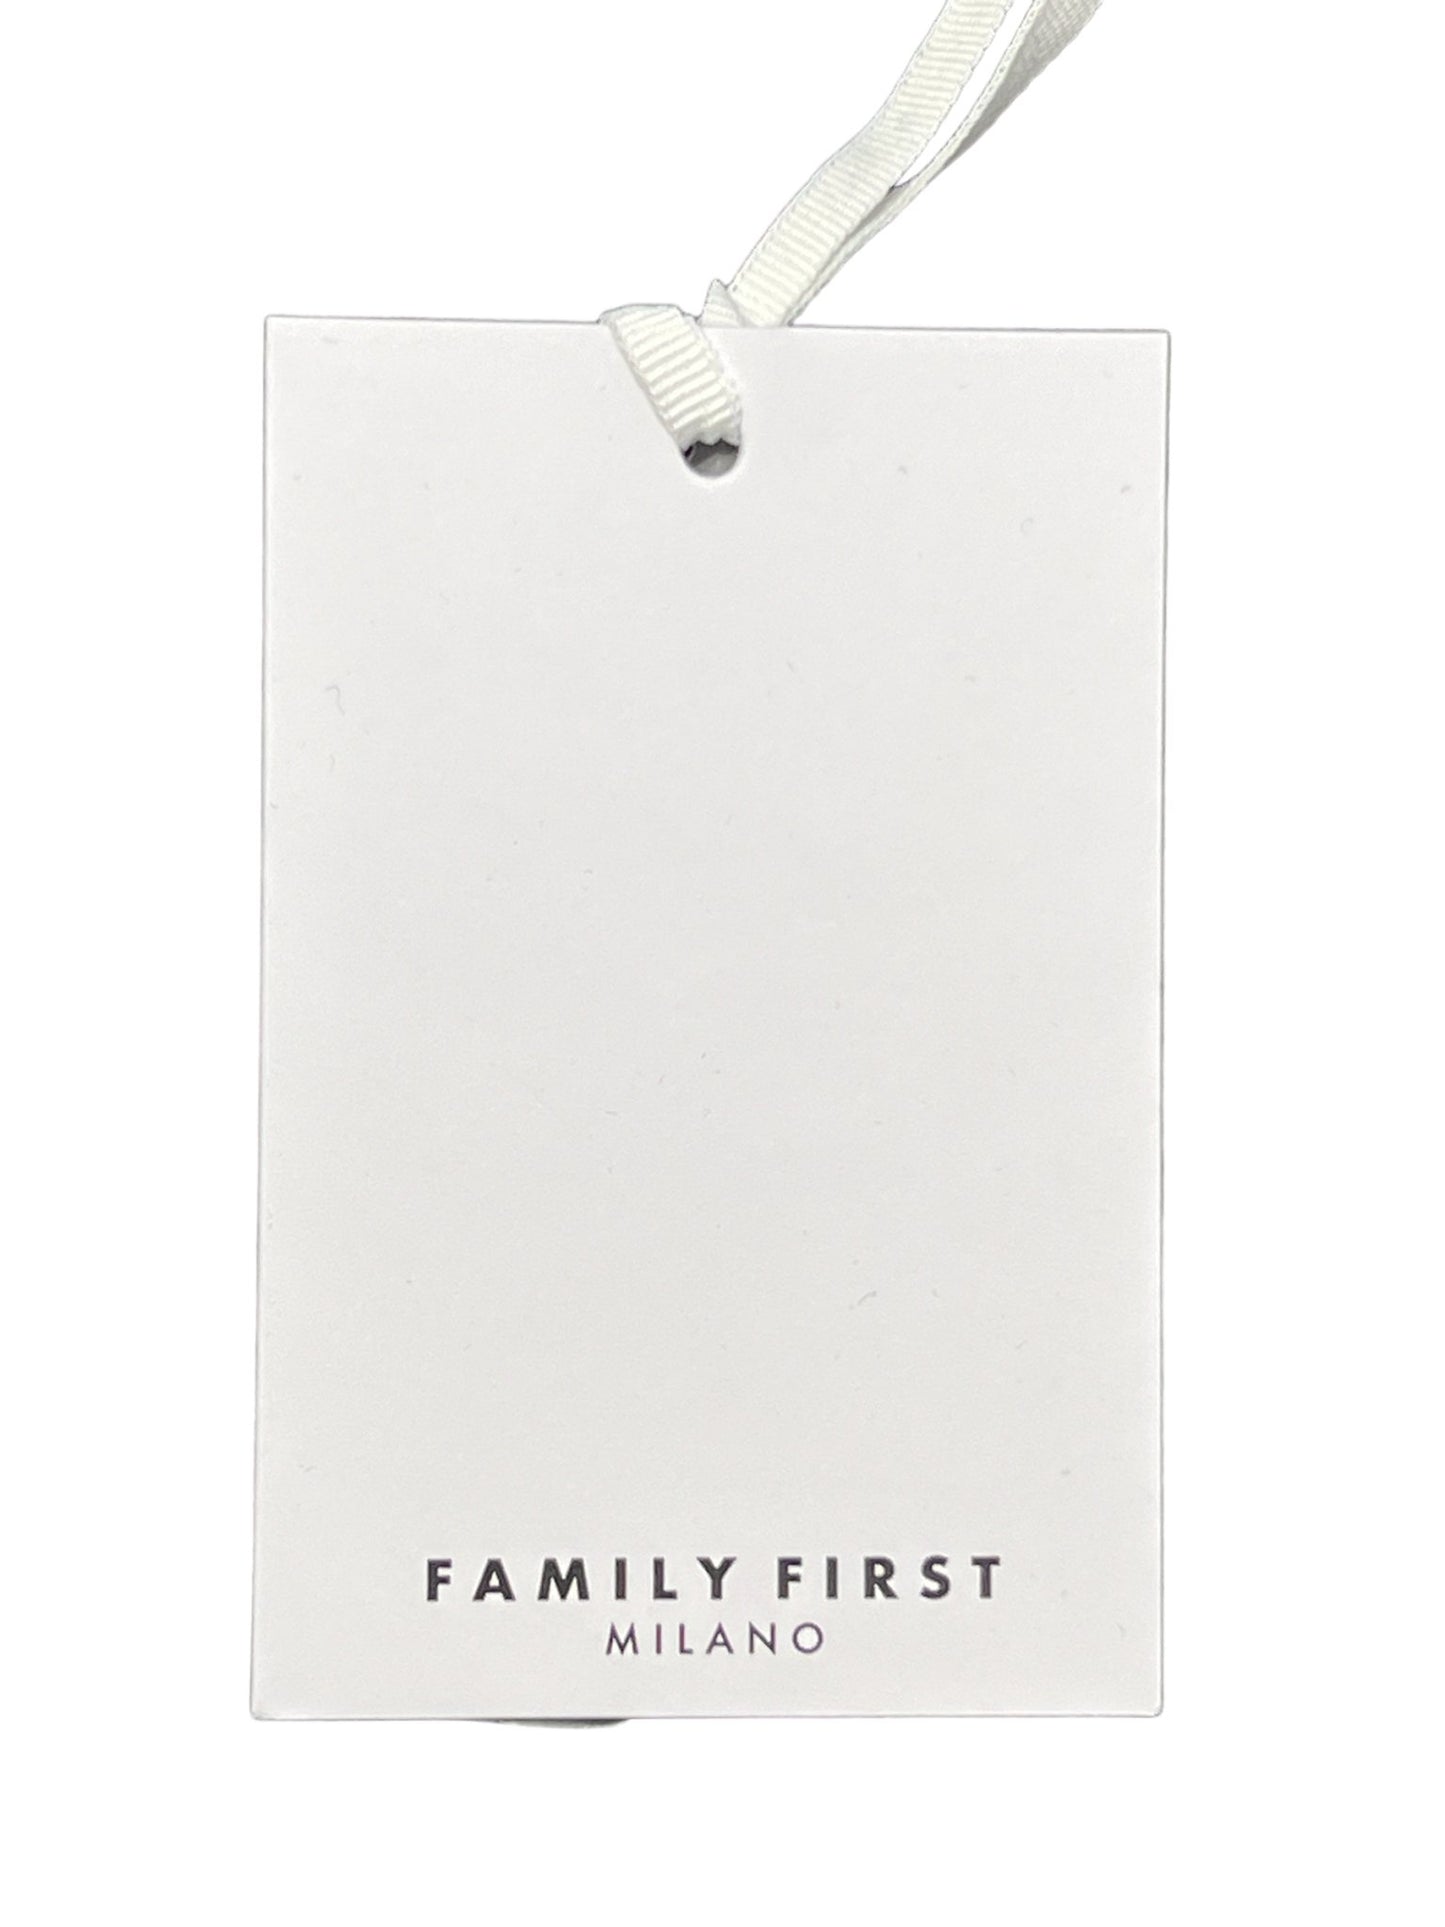 A white tag labeled "FAMILY FIRST TS2404 T-SHIRT CAVIAR DARK BLUE" attached by a navy blue ribbon, displayed against a plain background.